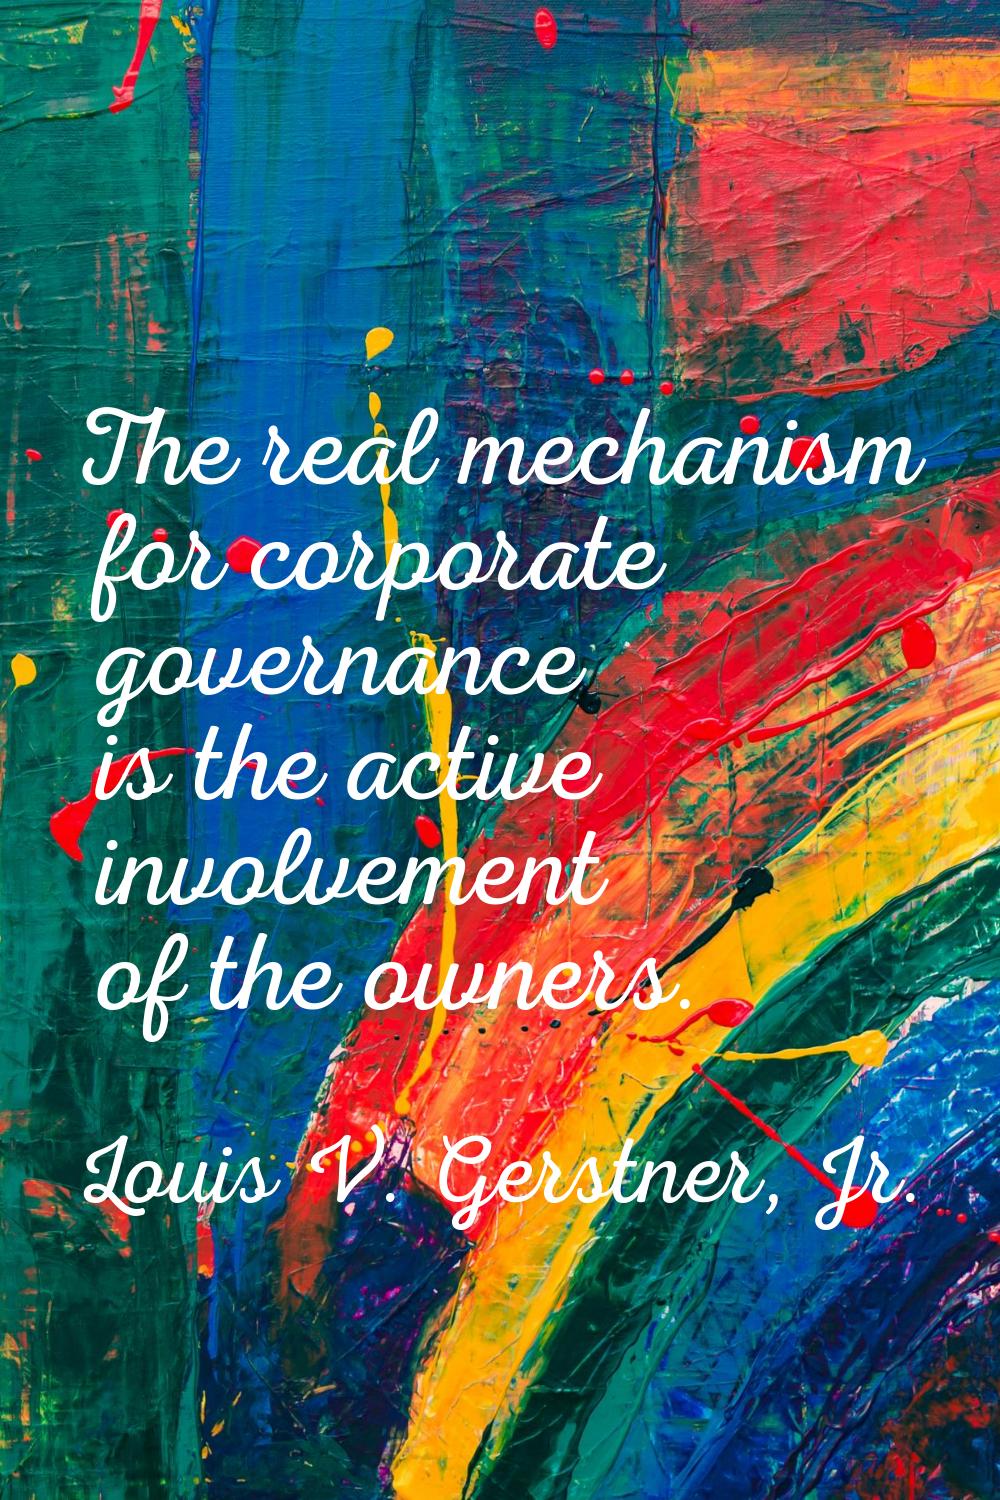 The real mechanism for corporate governance is the active involvement of the owners.